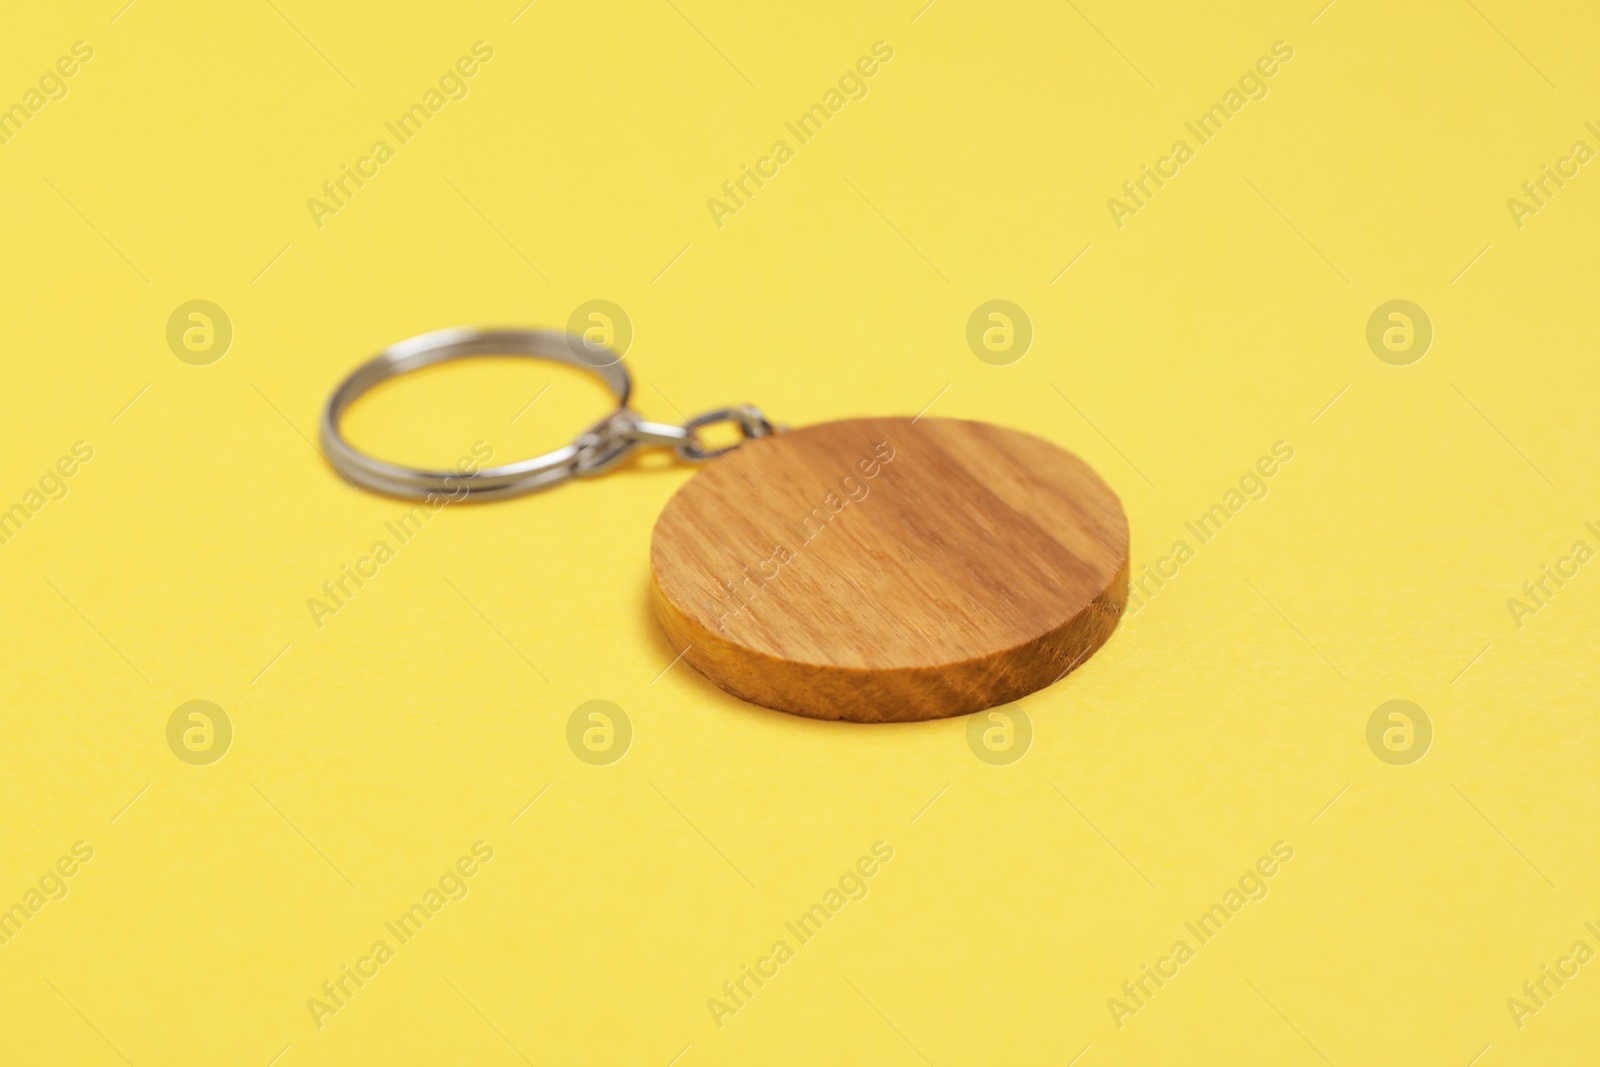 Photo of Wooden keychain in shape of smiley face on yellow background